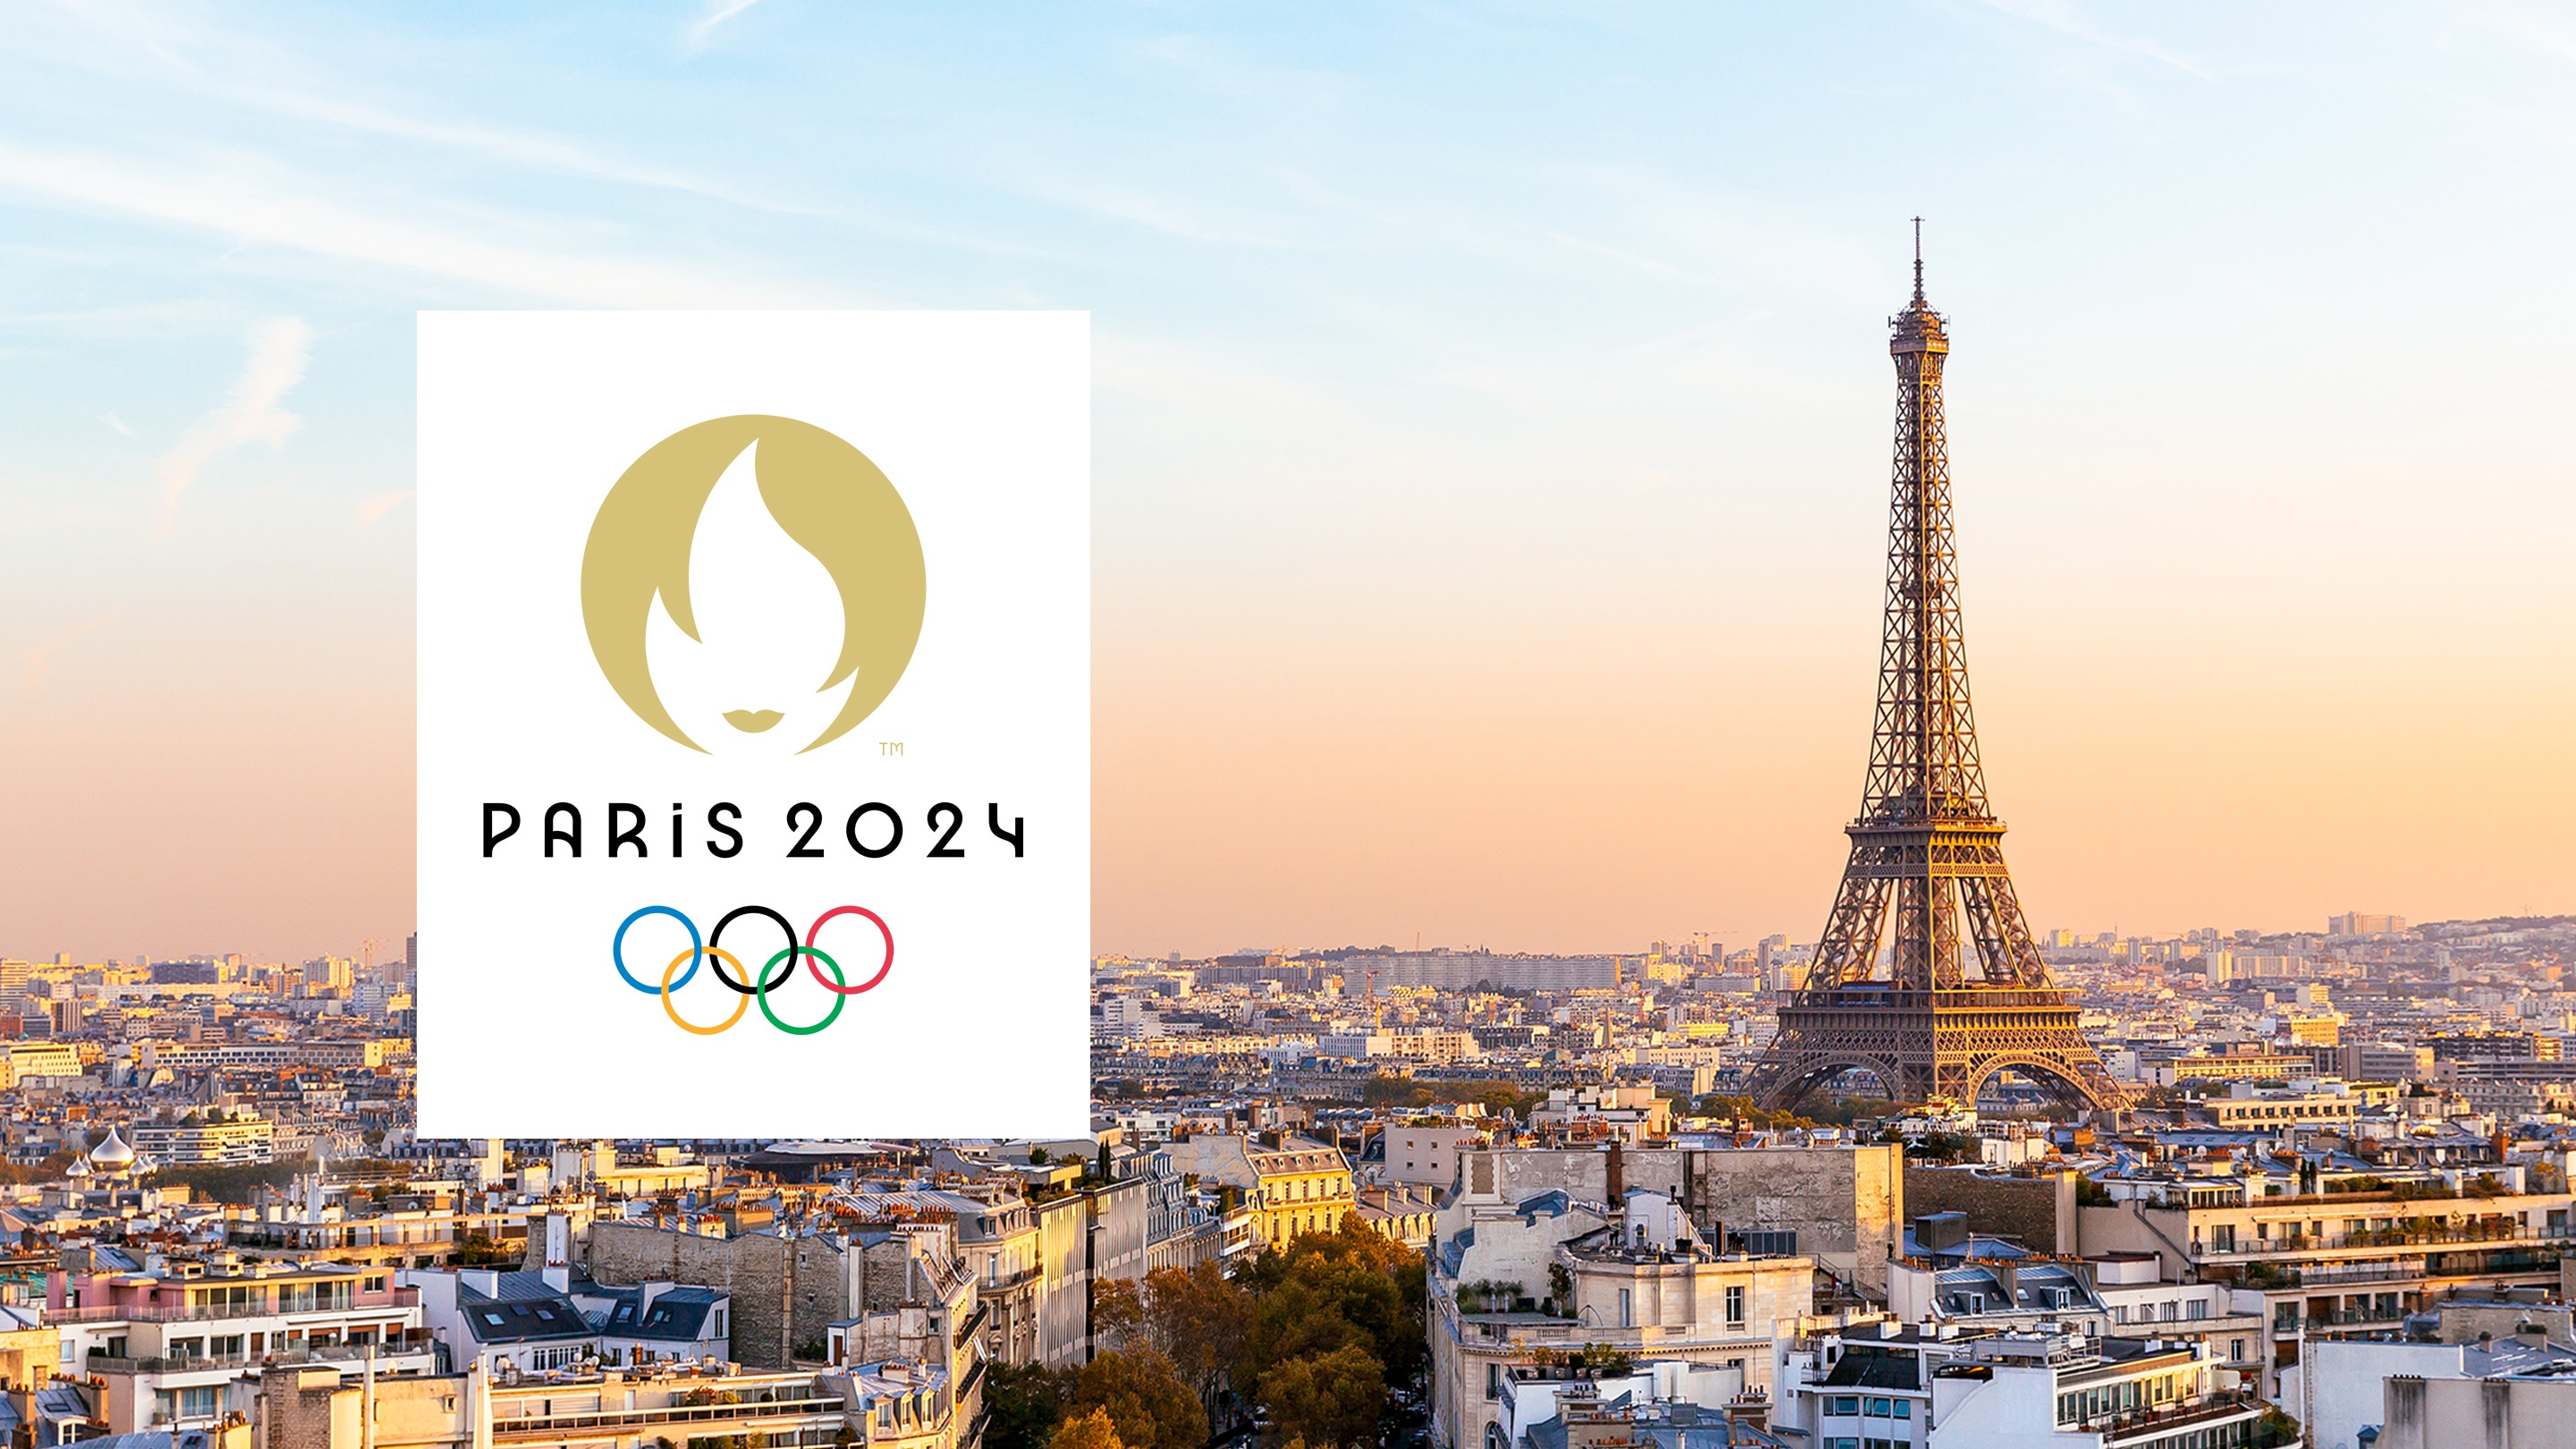 Paris 2024 world’s media for key updates ahead of Olympic and